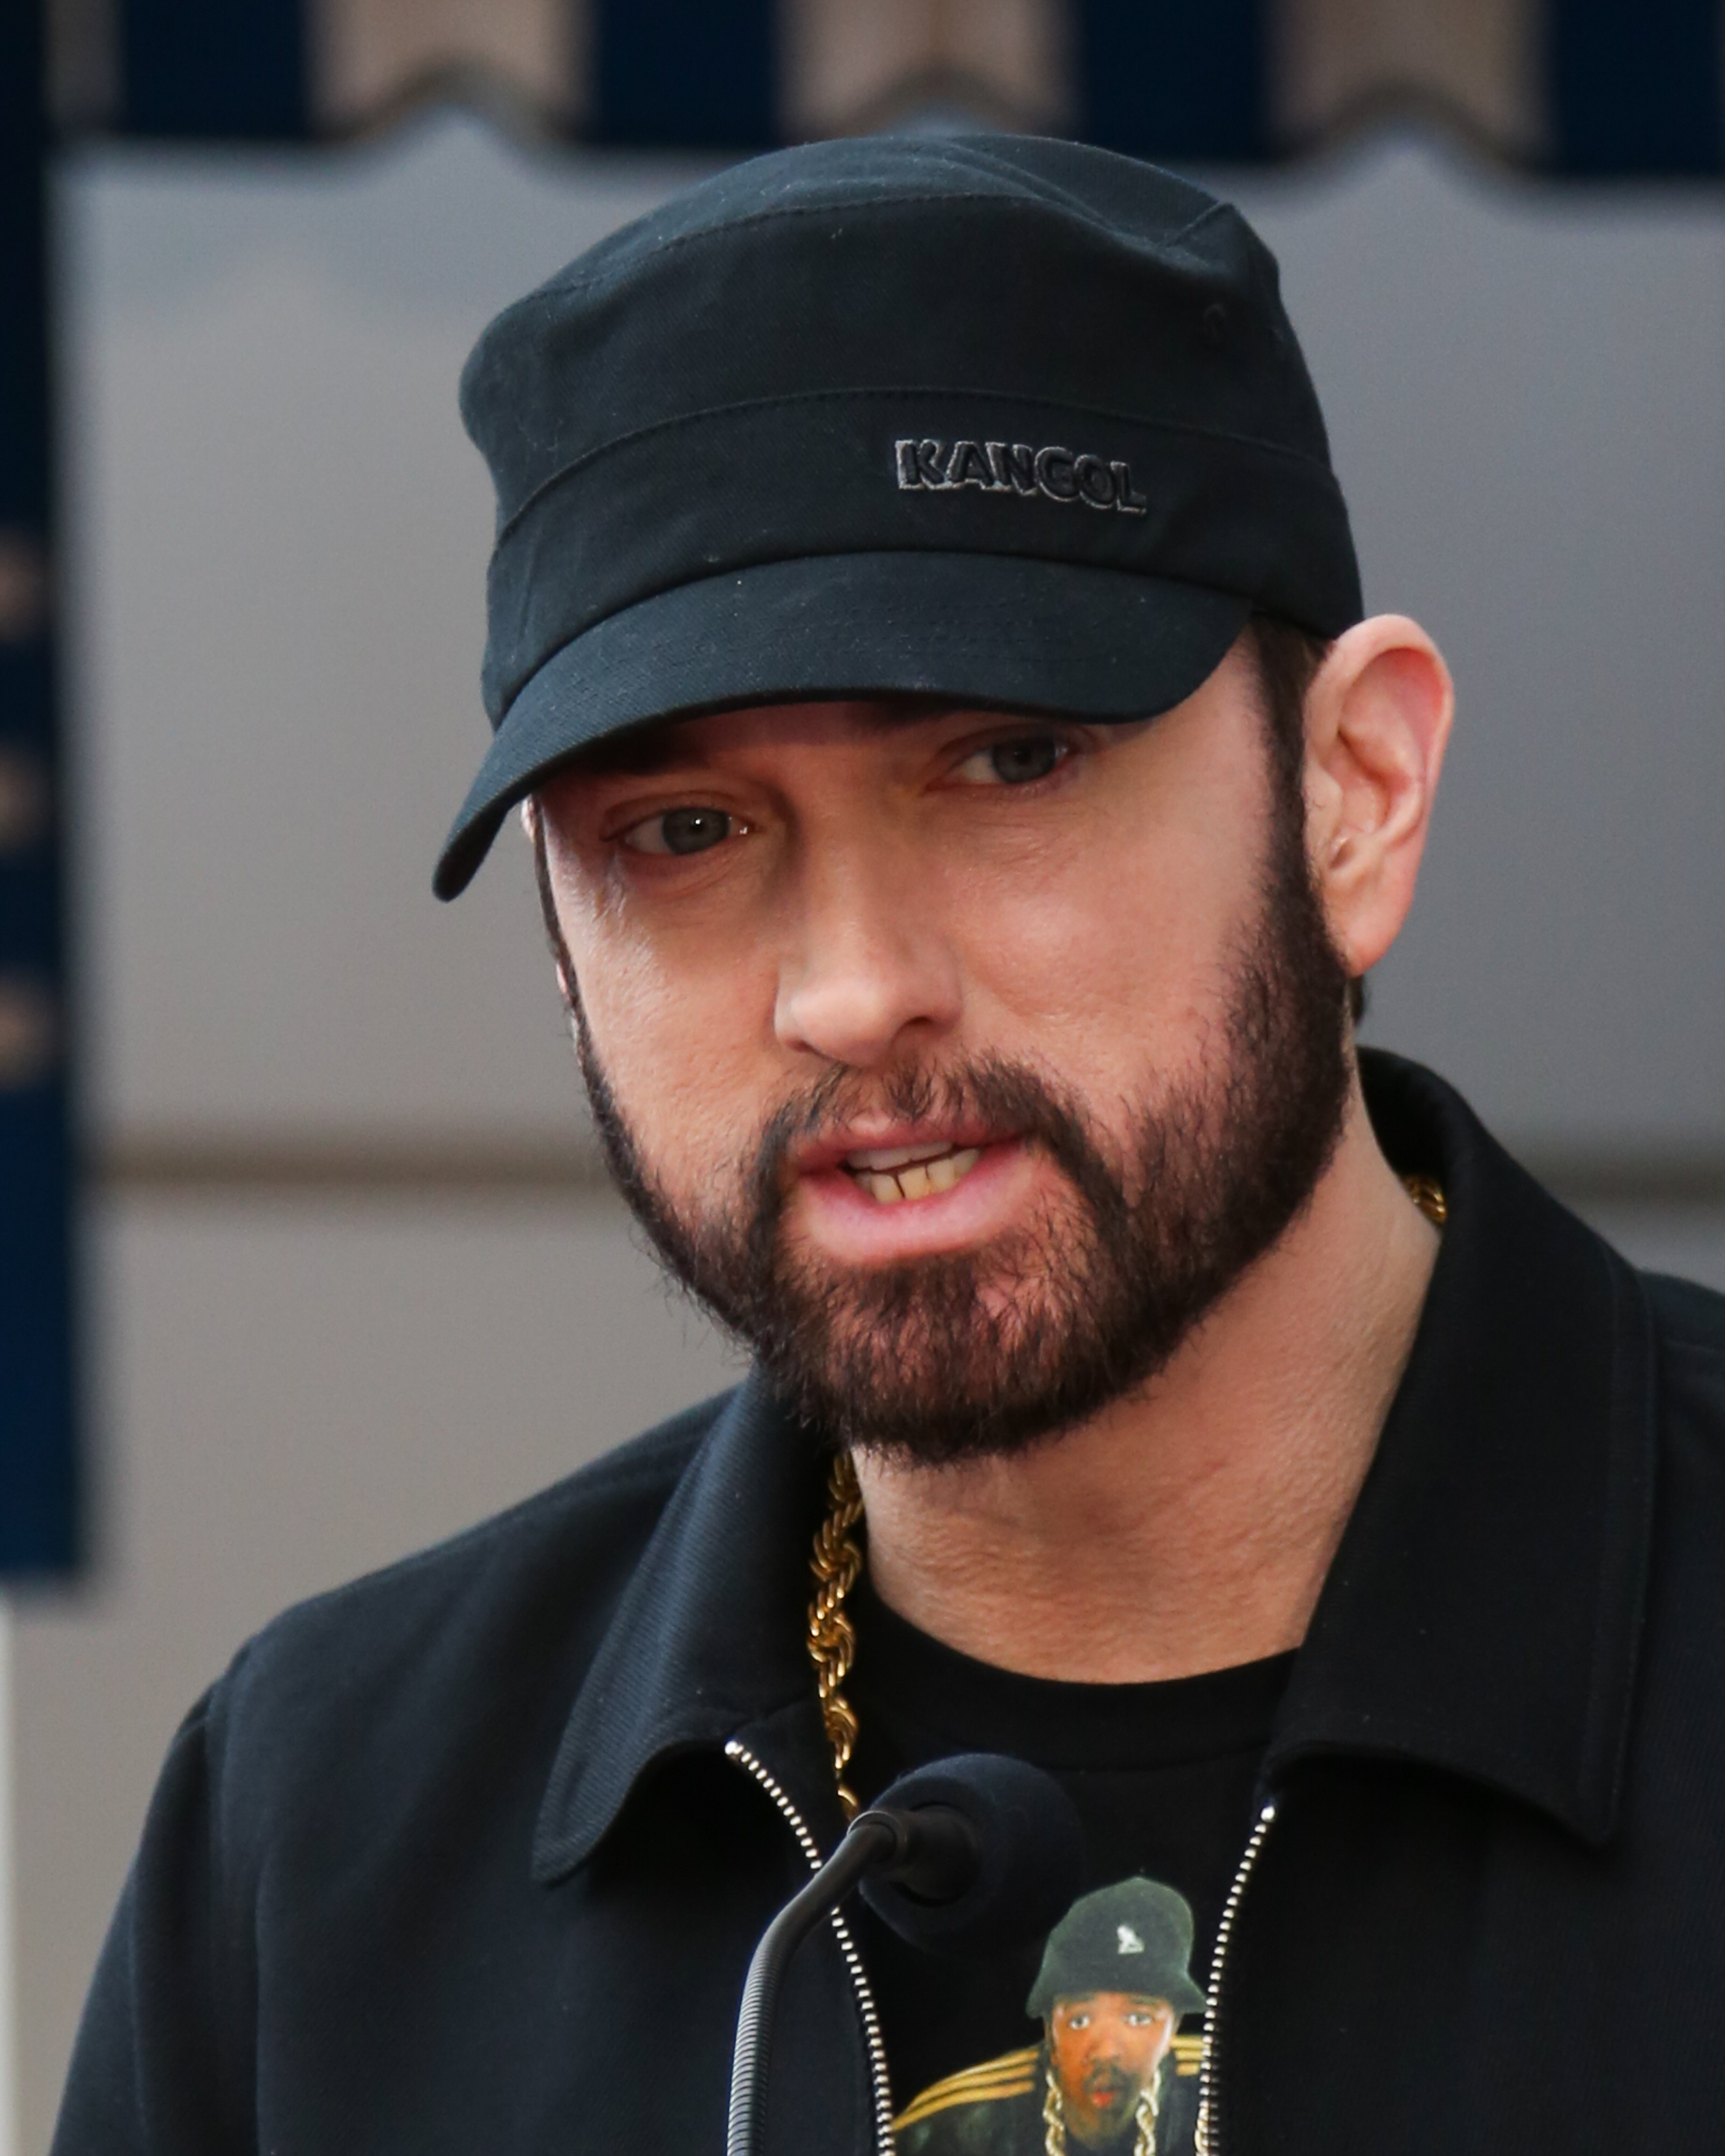 Eminem attends a ceremony honoring Curtis "50 Cent" Jackson with a star on the Hollywood Walk of Fame on January 30, 2020 in Hollywood, California. | Source: Getty Images